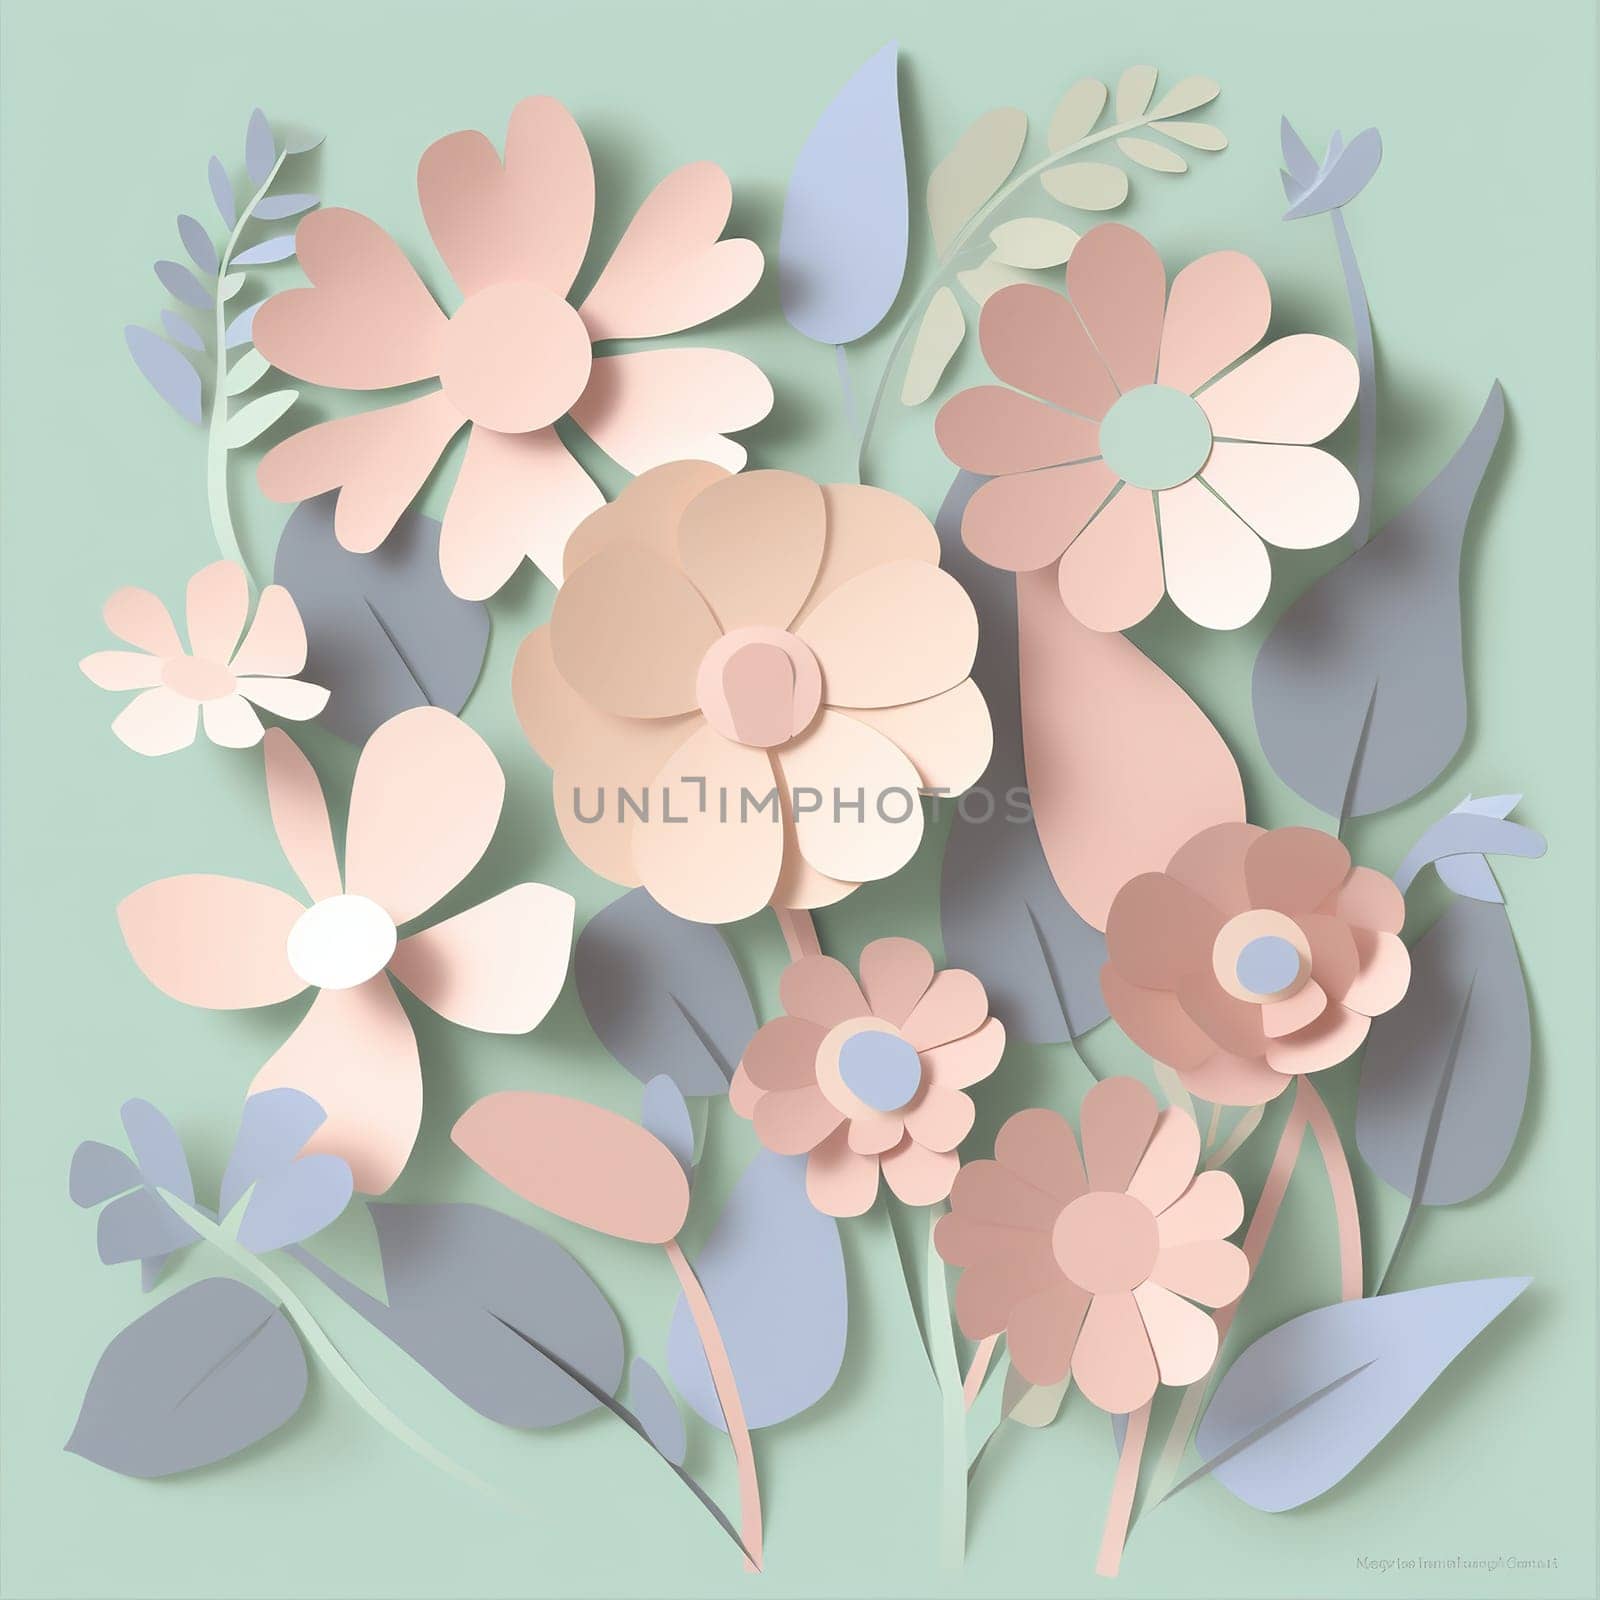 Illustration On Paper Showcases Quilling Flowers In Pastel Colors